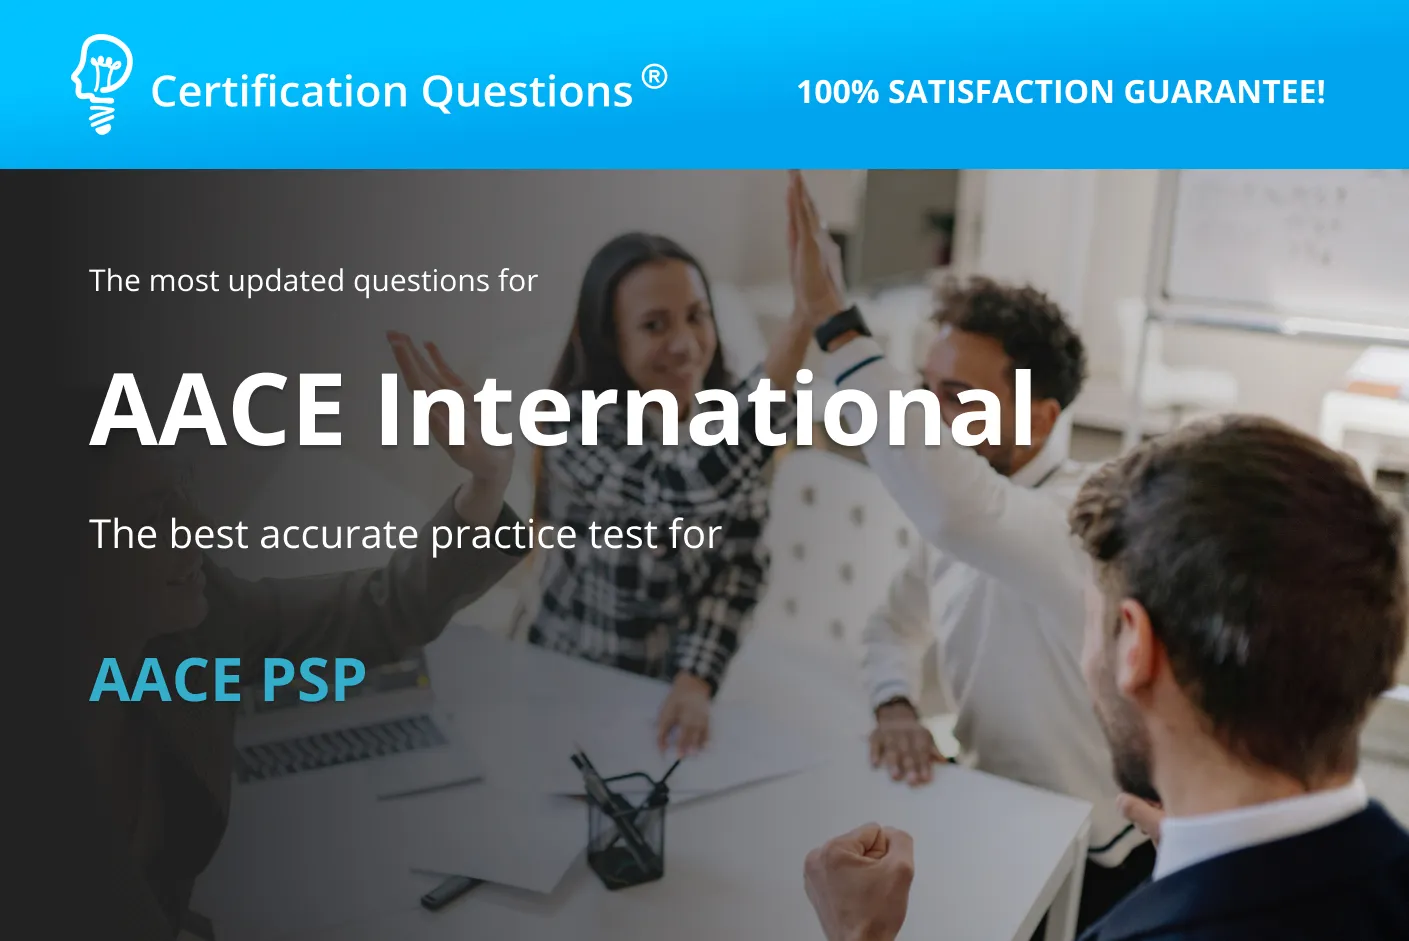 This image represents the aace-psp exam questions in USA